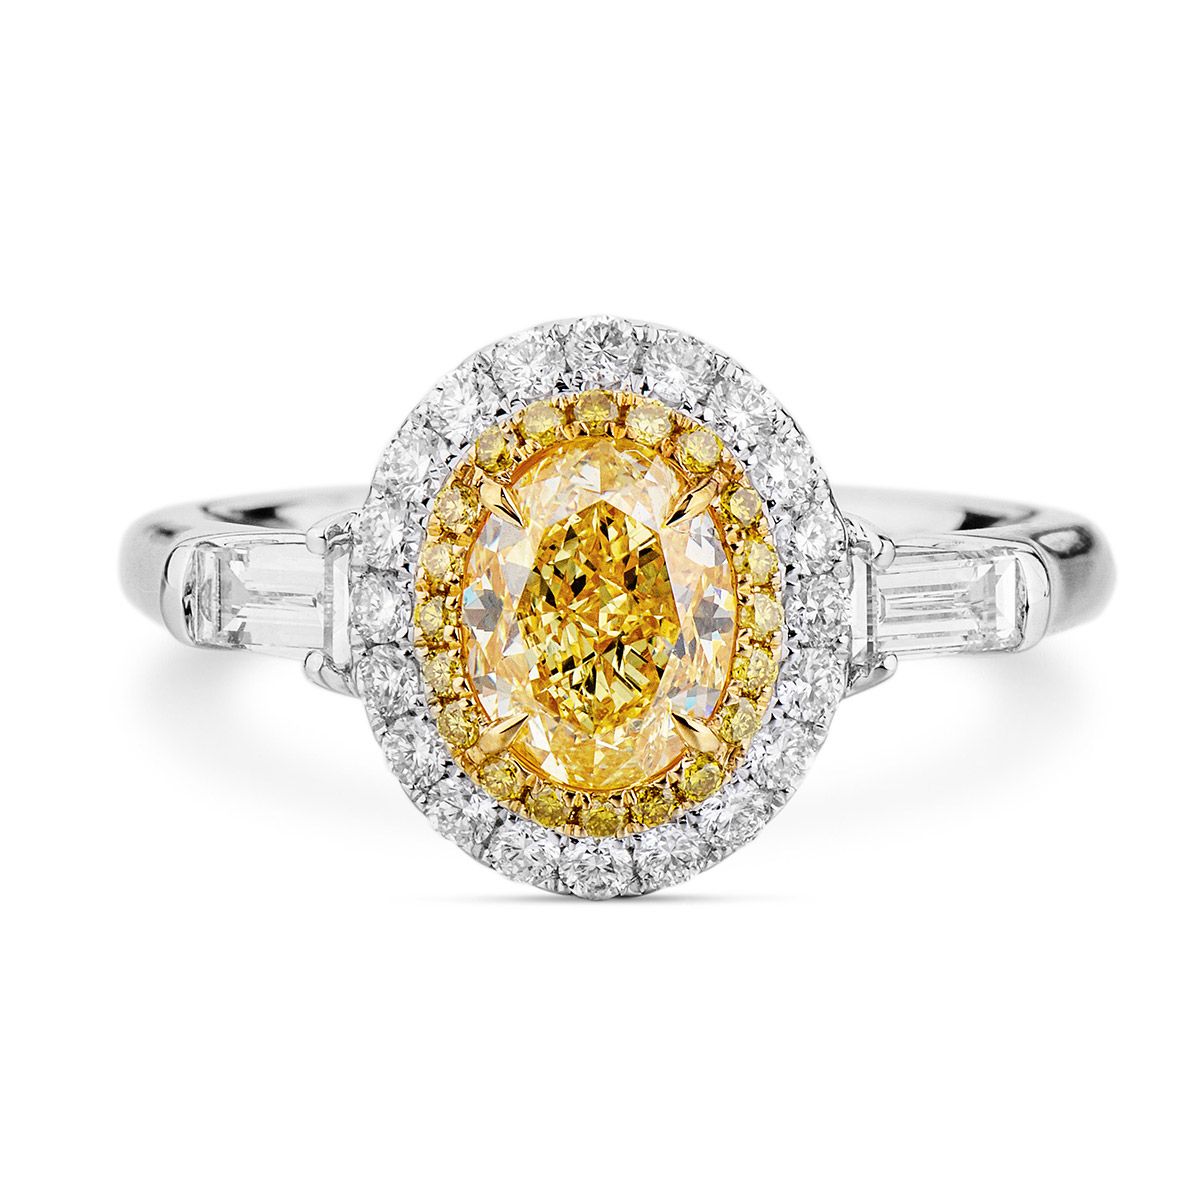 Fancy Yellow Diamond Ring, 1.04 Ct. (1.71 Ct. TW), Oval shape, GIA Certified, 2165820692